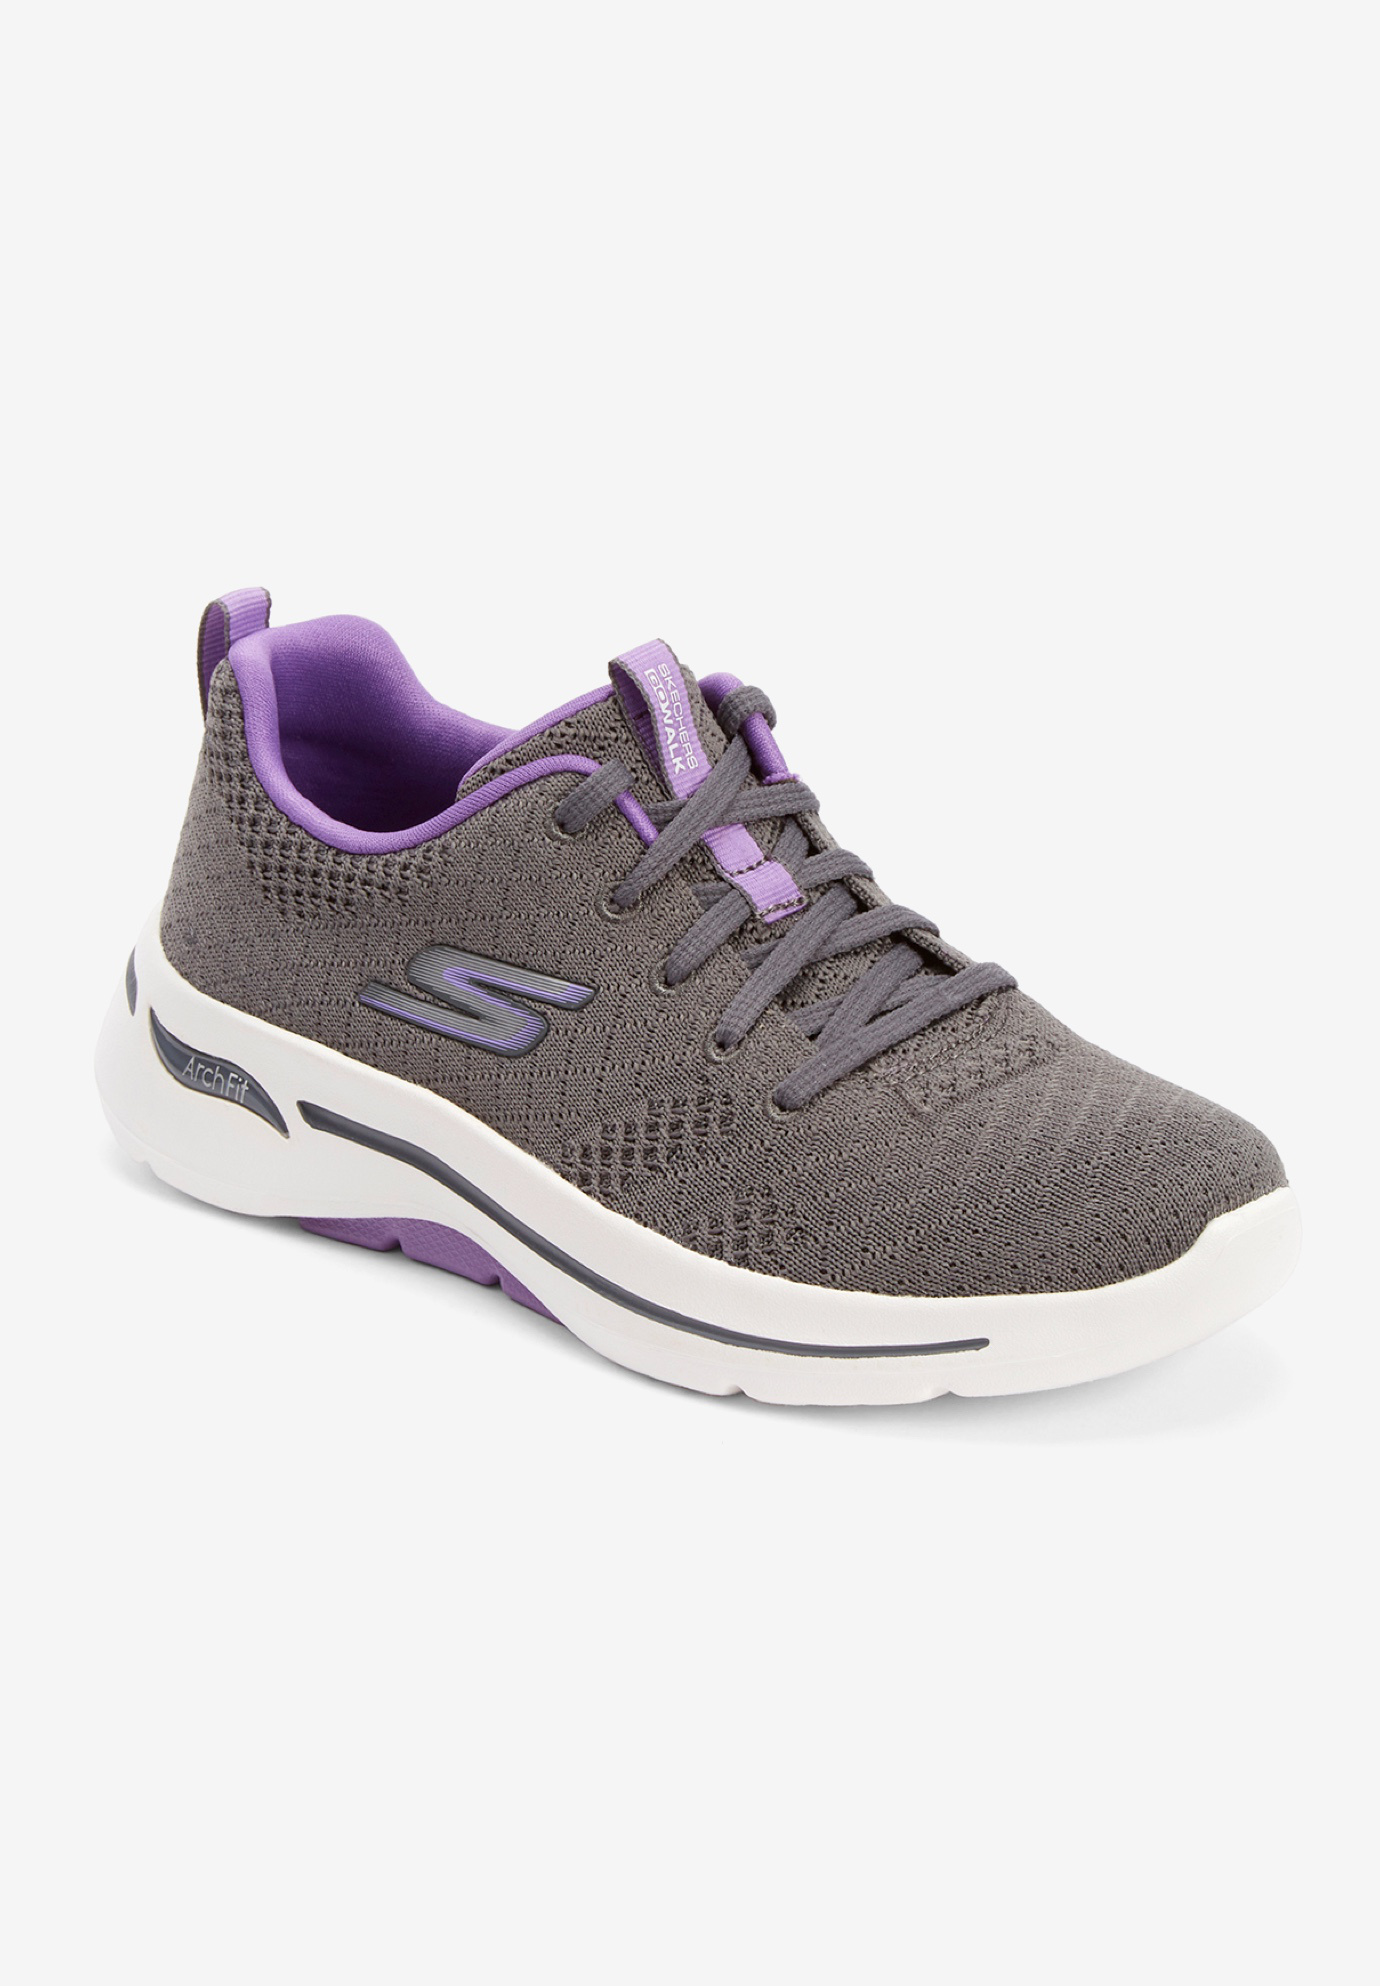 The Arch Fit Lace Up Sneaker, 